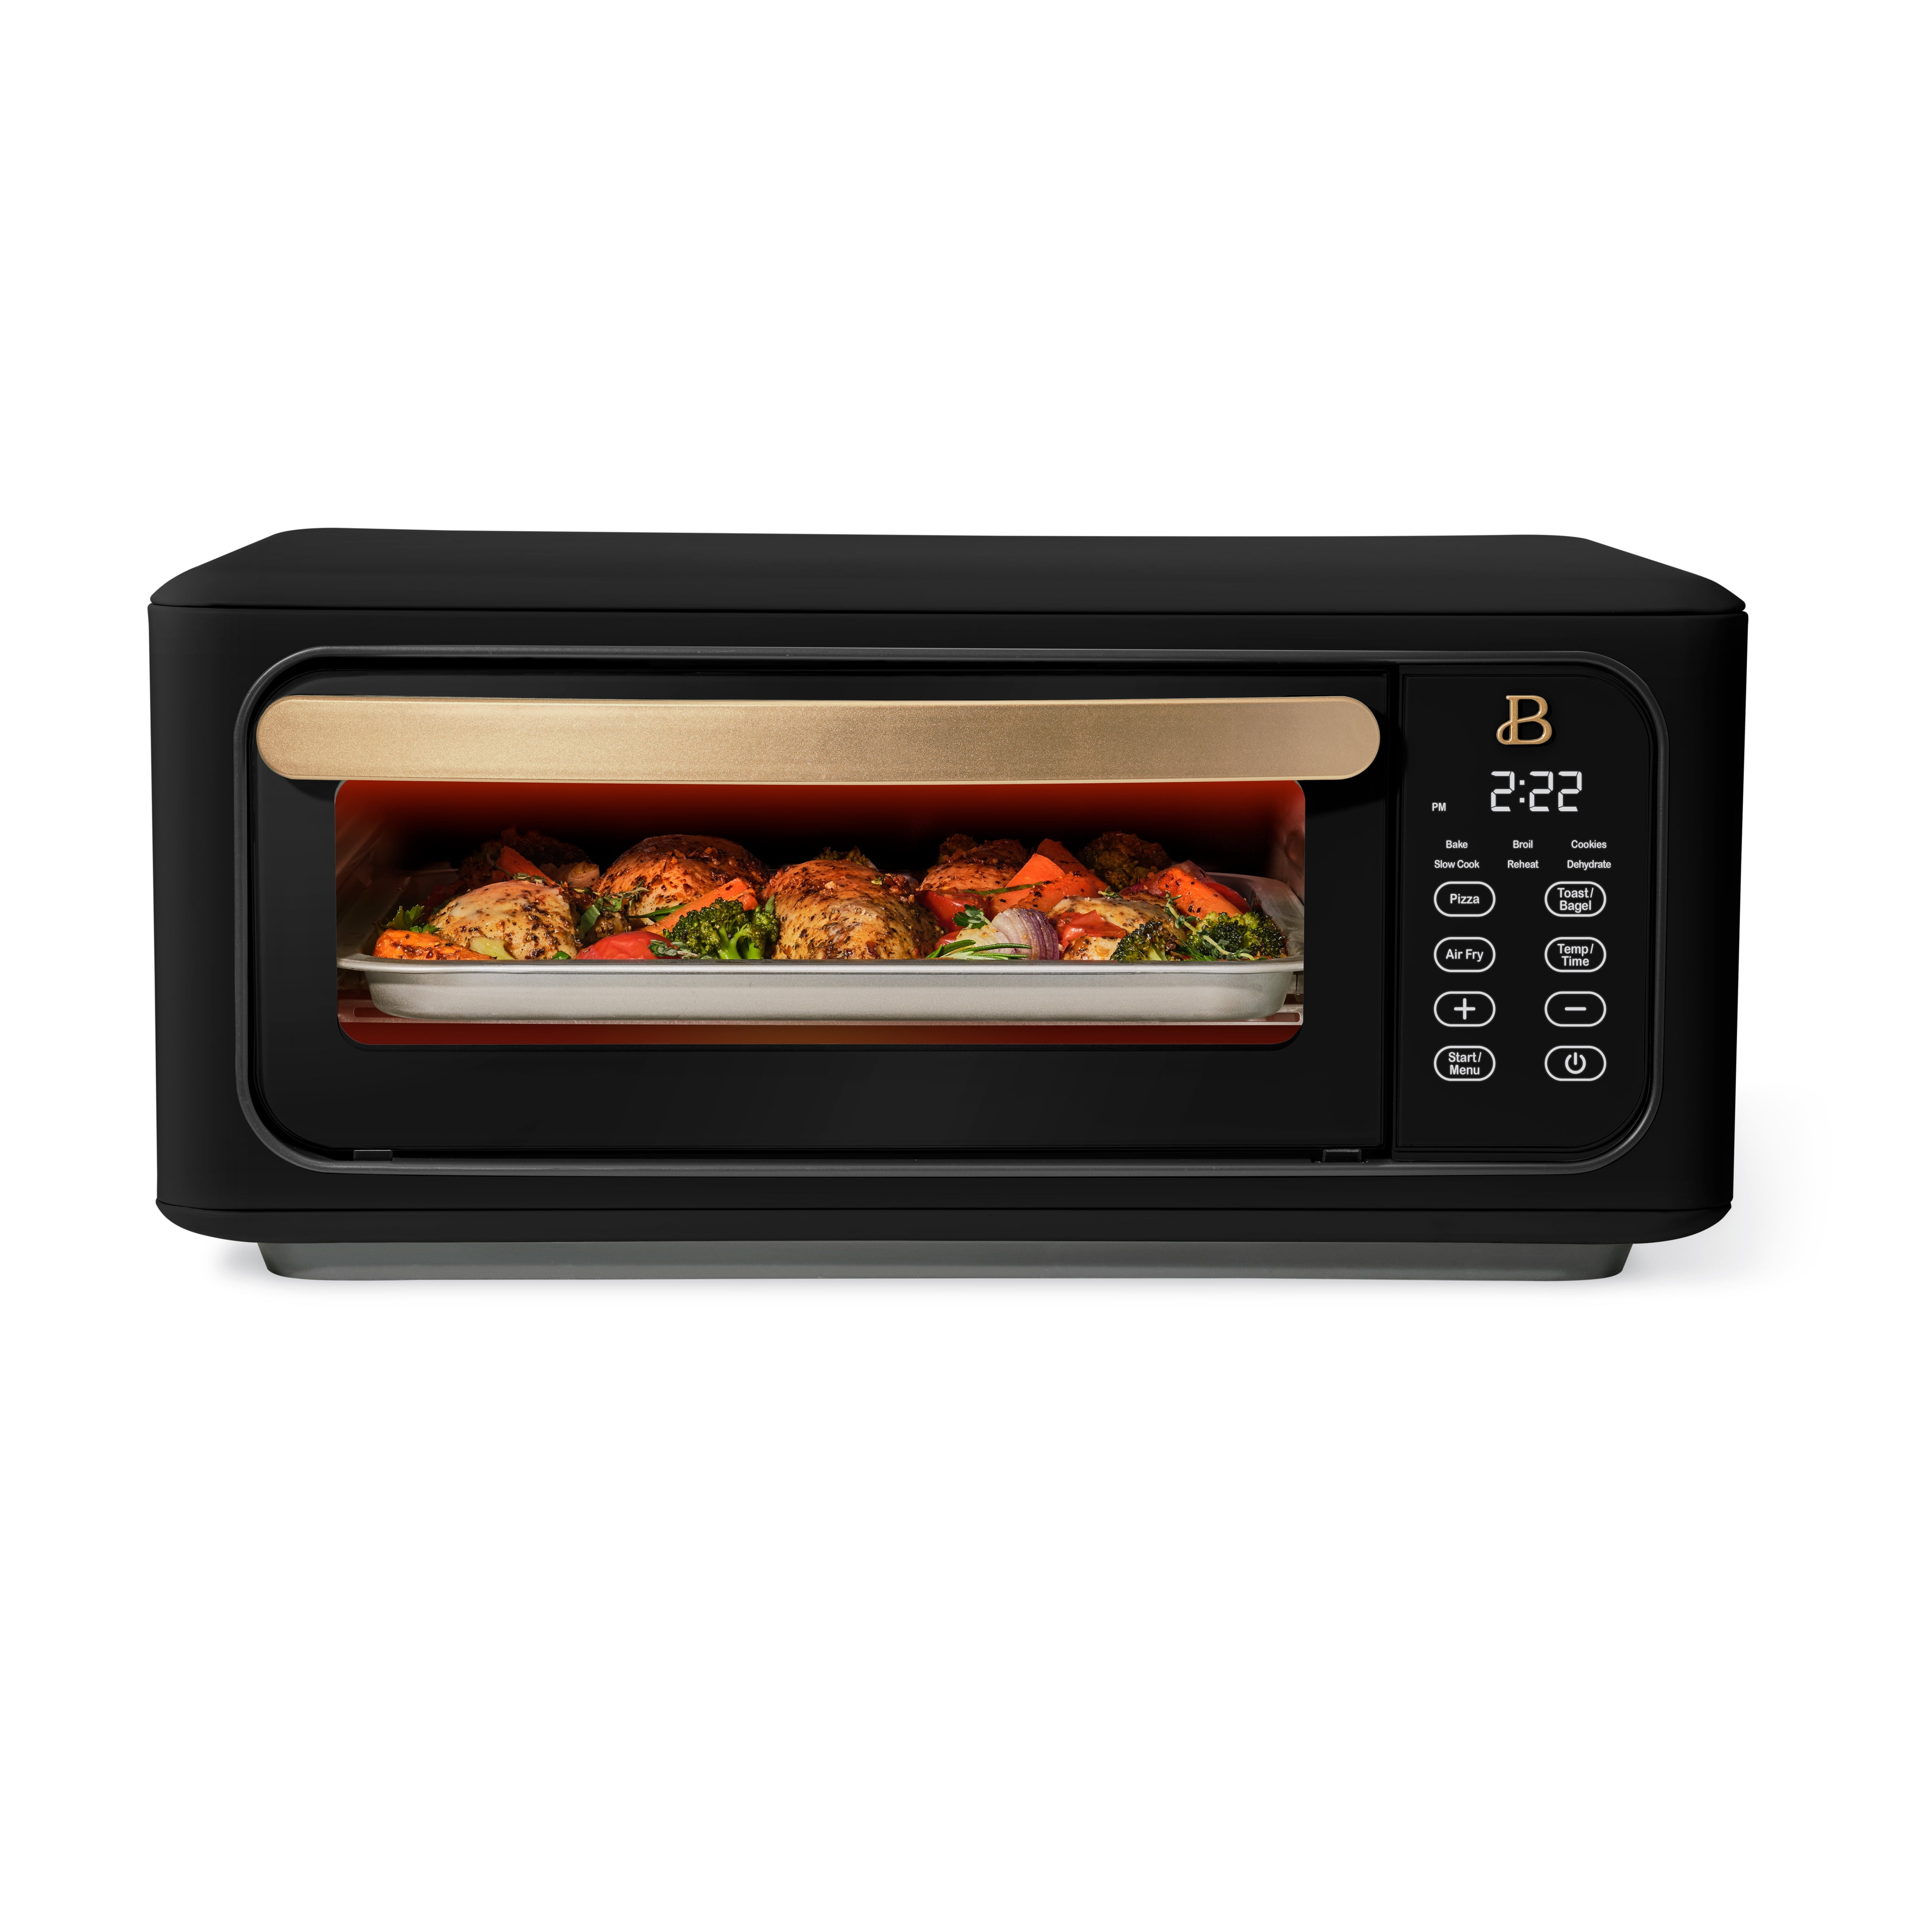 Air Fryer, Paris Rhône 14.8 Quart Toaster Oven, 5-in-1 Convection Oven for  4-Slice Toast, 9-inch Pizza, Knob-Controlled Kitchen Countertop Appliance